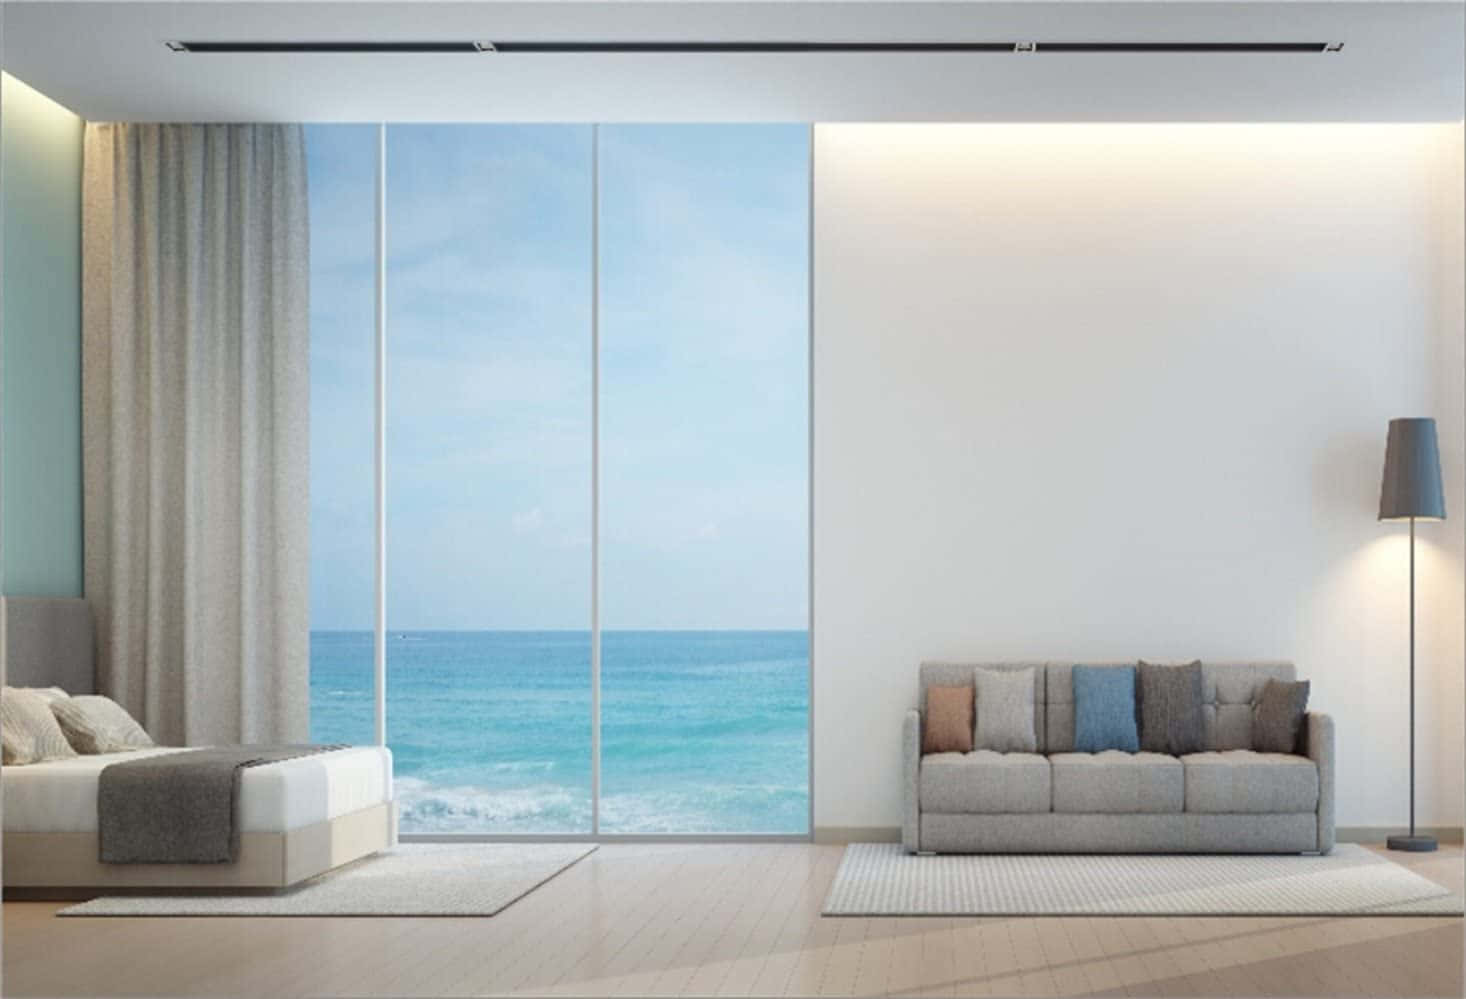 Room With Ocean View Background